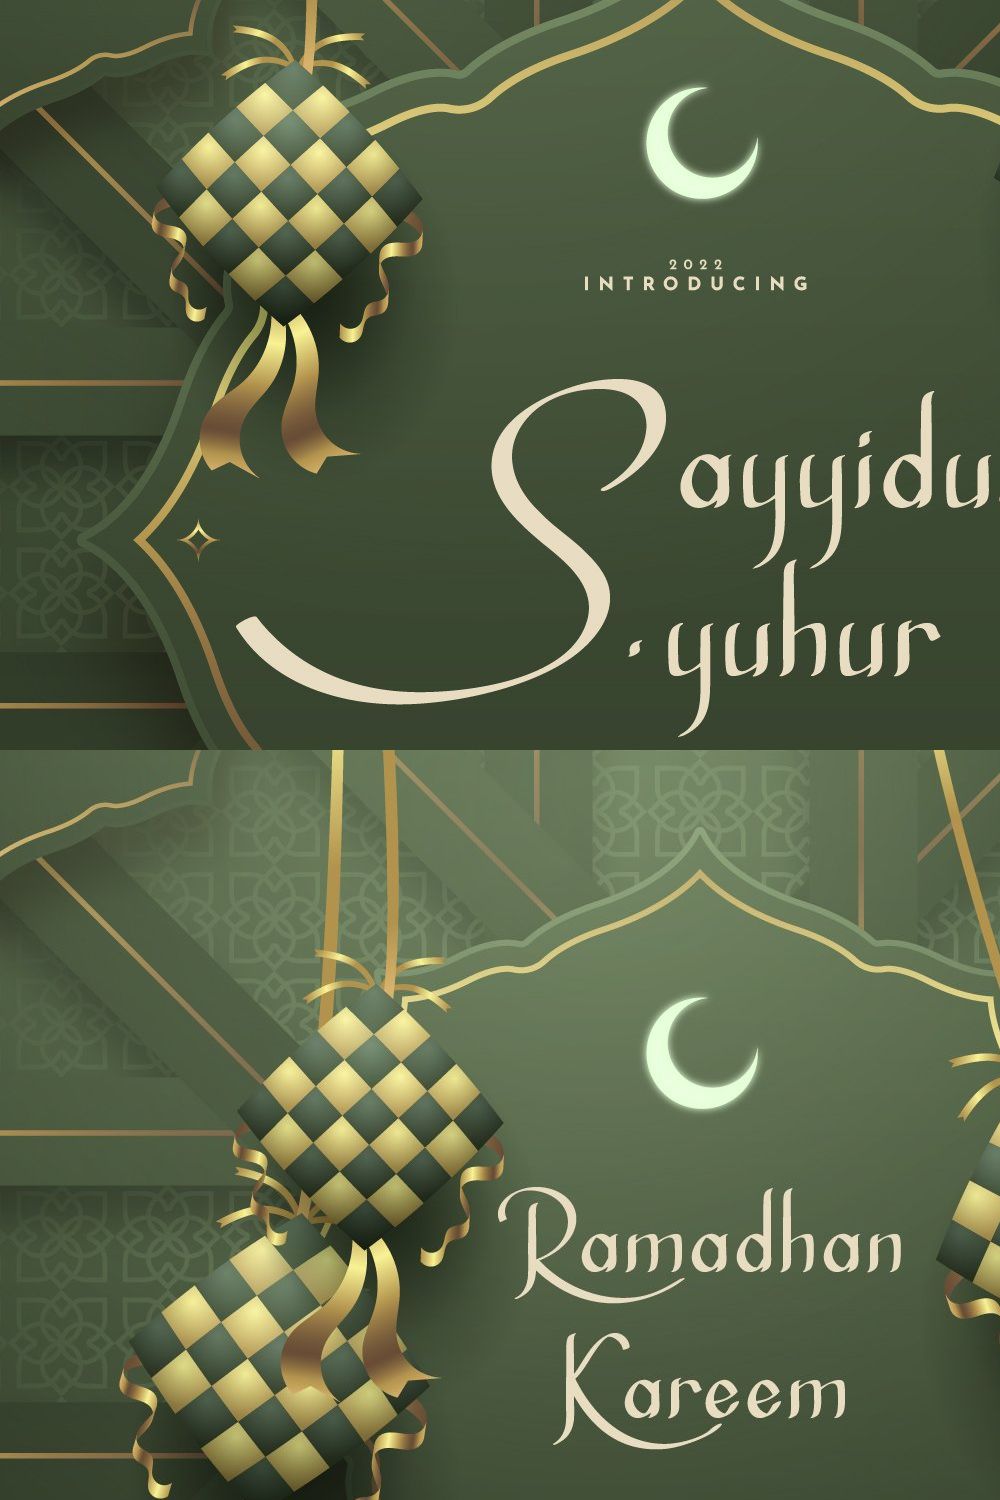 Sayyidus Syuhur Calligraphy pinterest preview image.